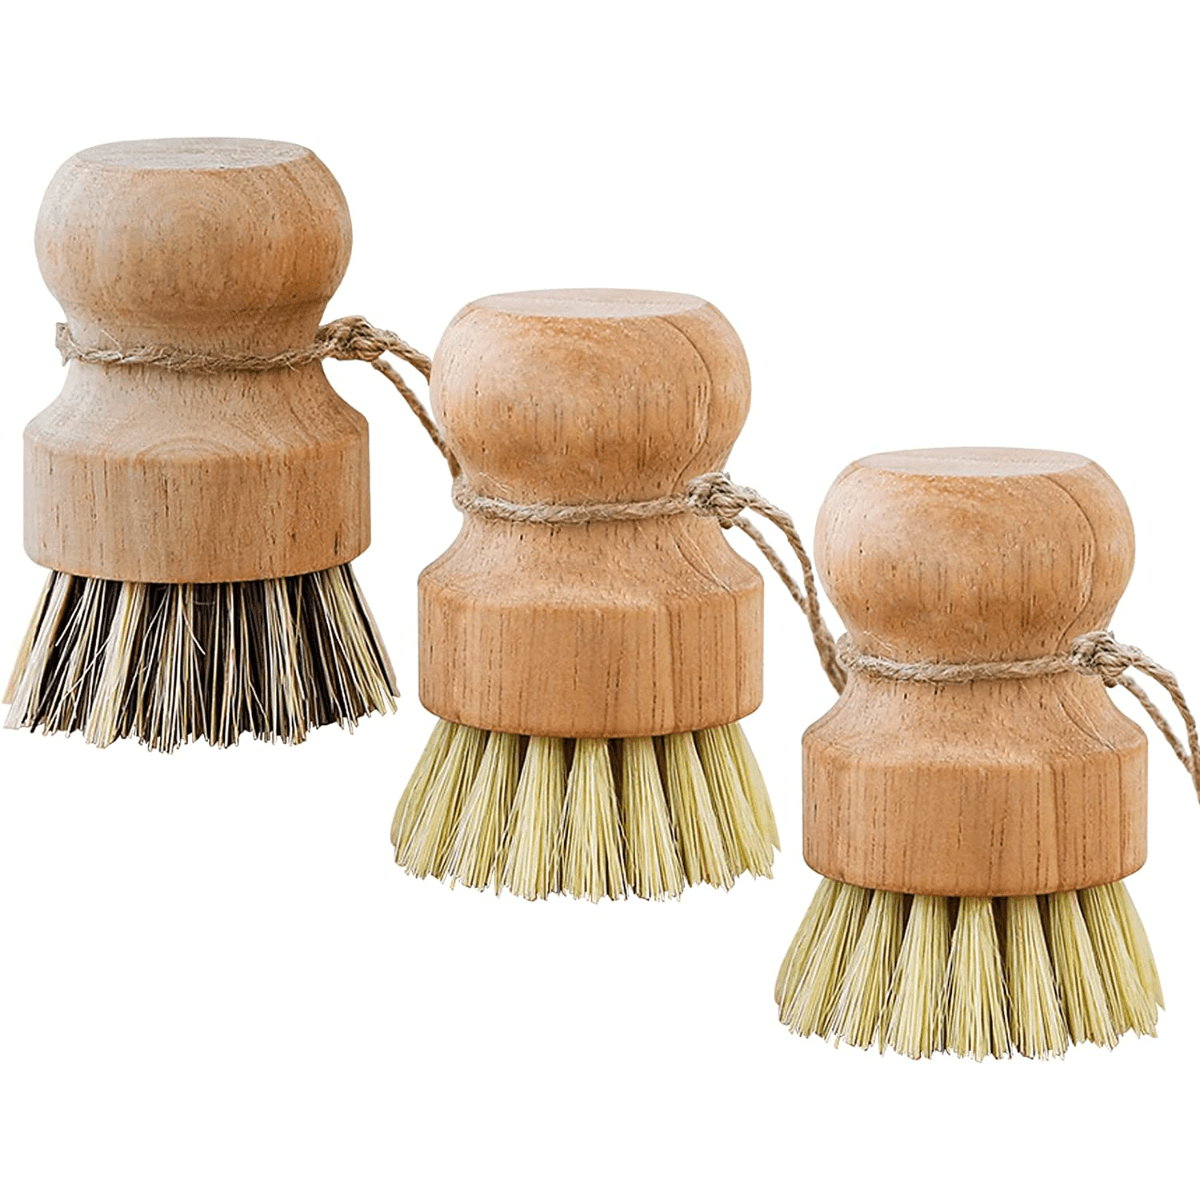 SUBEKYU Kitchen Scrub Brush Set of 4, All Natural Cleaning Brushes for  Dish/Bottle/Vegetable/Pan/Pot, Scrubber with Bamboo Handle and Coconut  Fibers